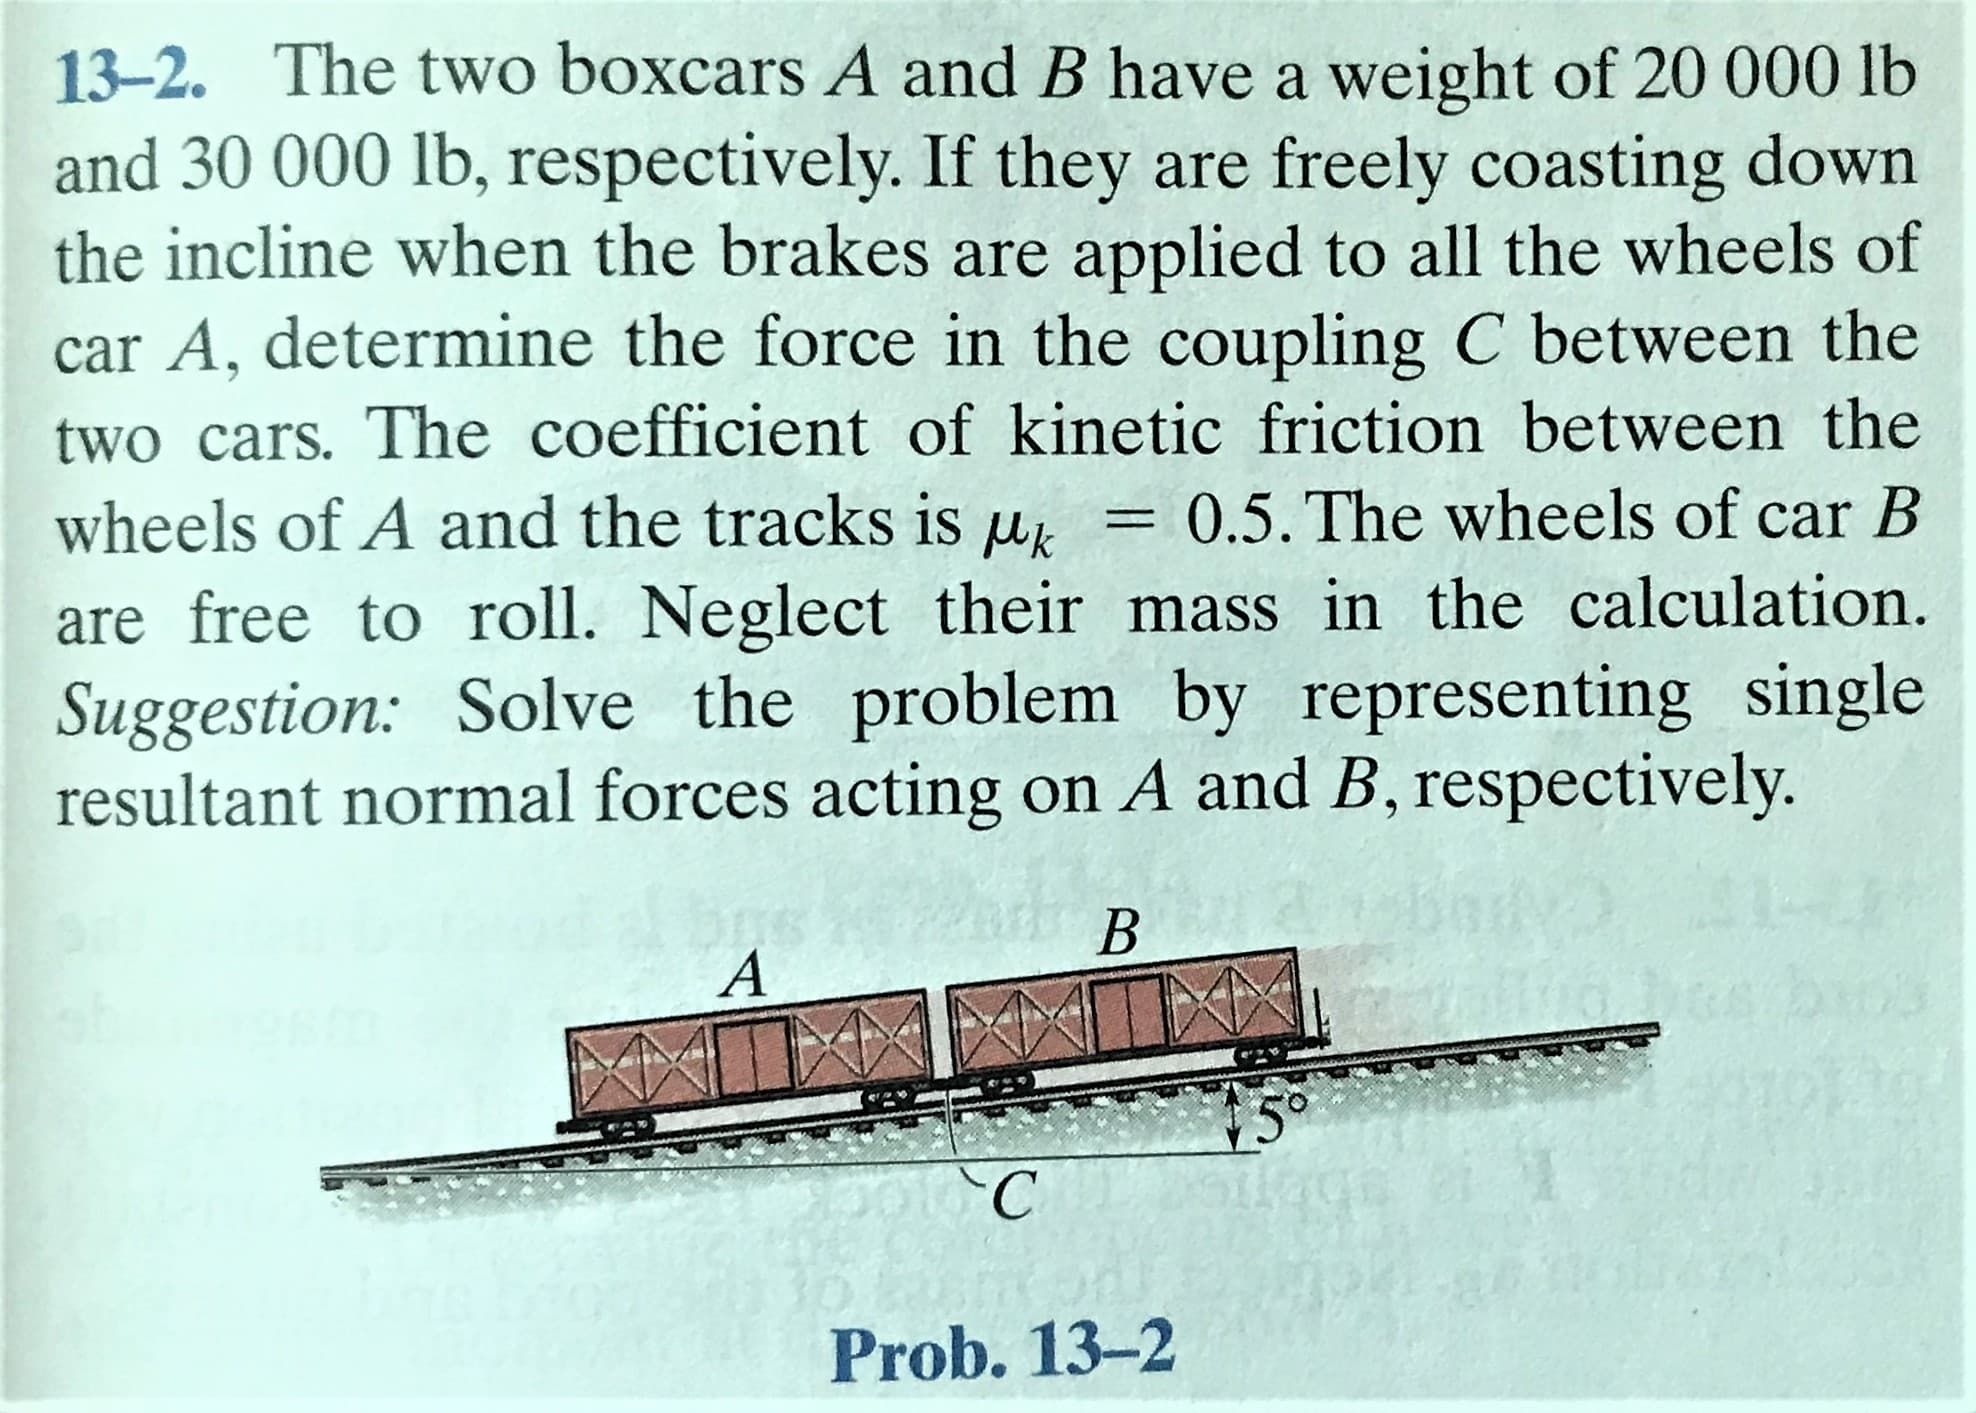 13-2. The two boxcars A and B have a weight of 20 000 lb
and 30 000 lb, respectively. If they are freely coasting down
the incline when the brakes are applied to all the wheels of
car A, determine the force in the coupling C between the
two cars. The coefficient of kinetic friction between the
0.5. The wheels of car B
wheels of A and the tracks is uk
are free to roll. Neglect their mass in the calculation.
Suggestion: Solve the problem by representing single
resultant normal forces acting on A and B, respectively.
A
5°
Prob. 13-2
